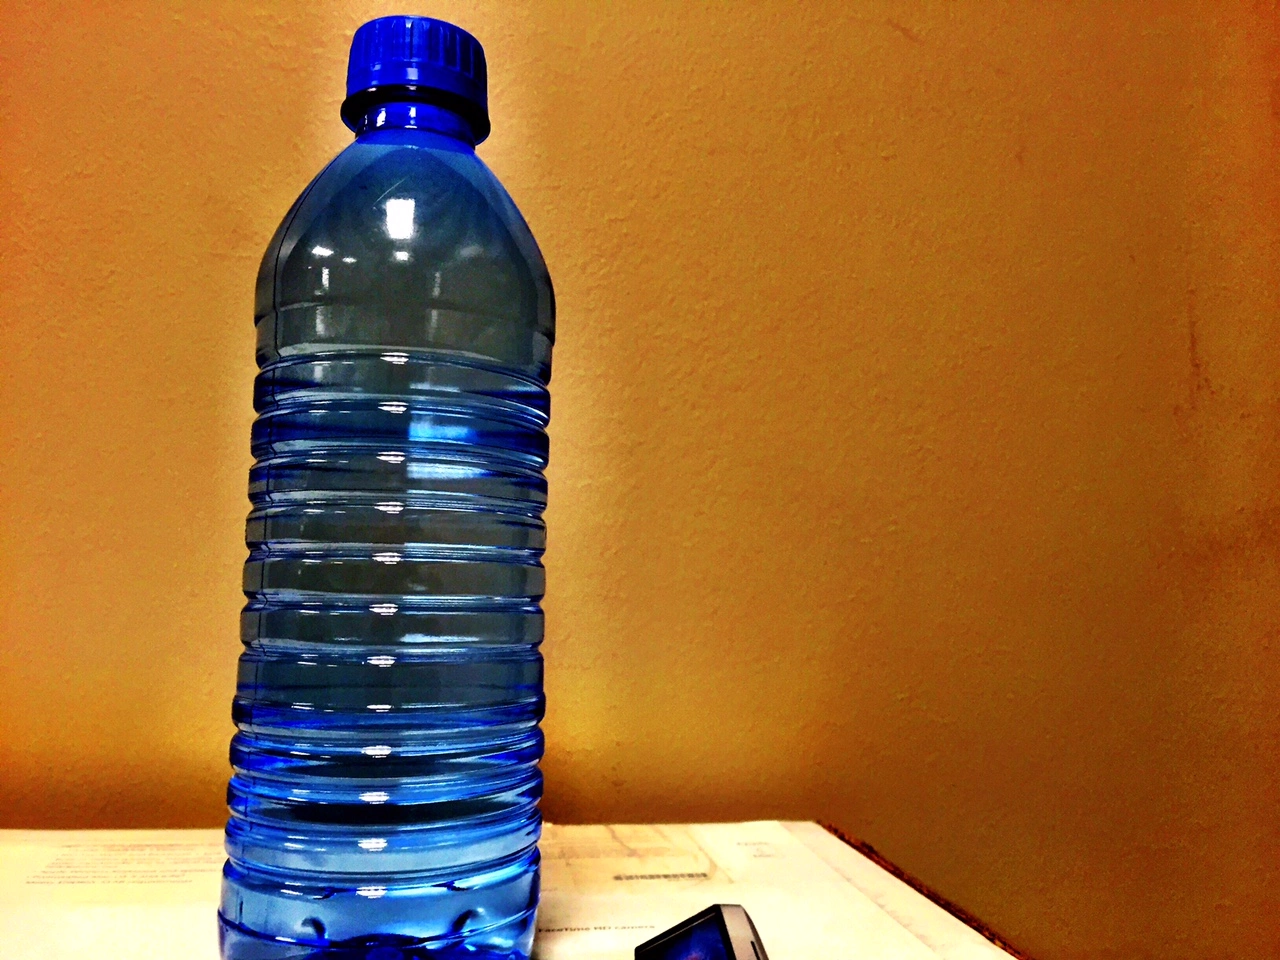 BPA-free water bottles may contain another harmful chemical